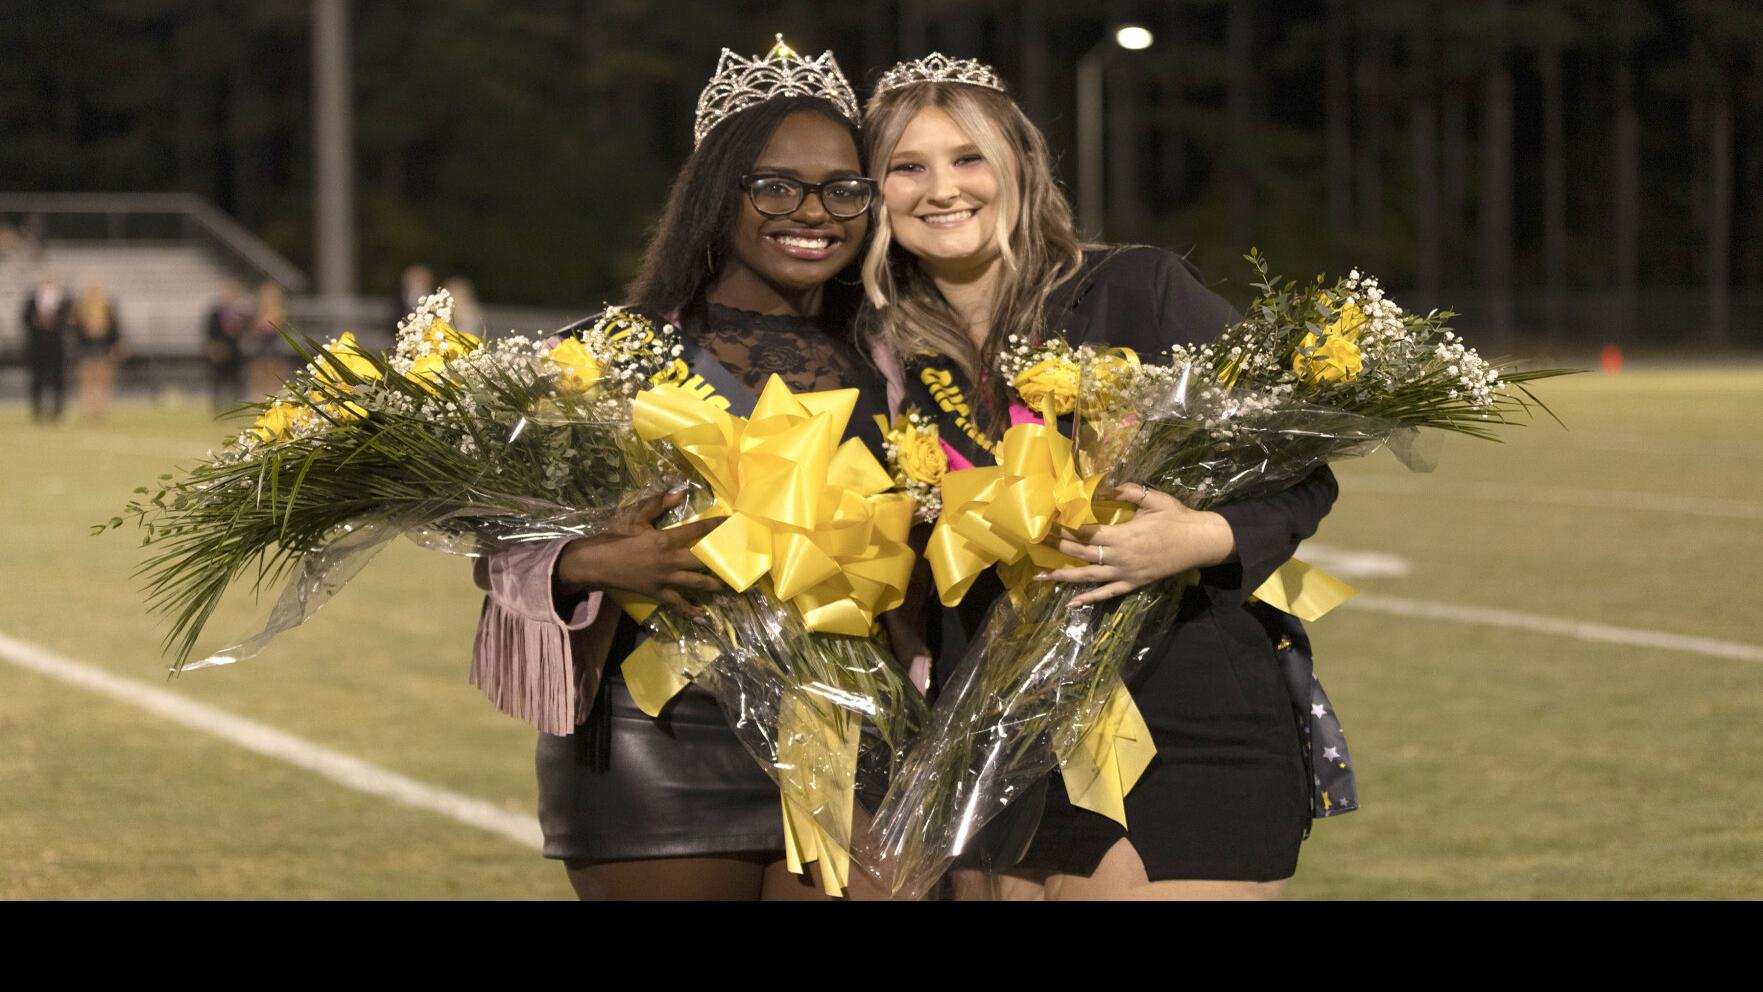 Homecoming queen and maid-of-honor named at Draughn homecoming